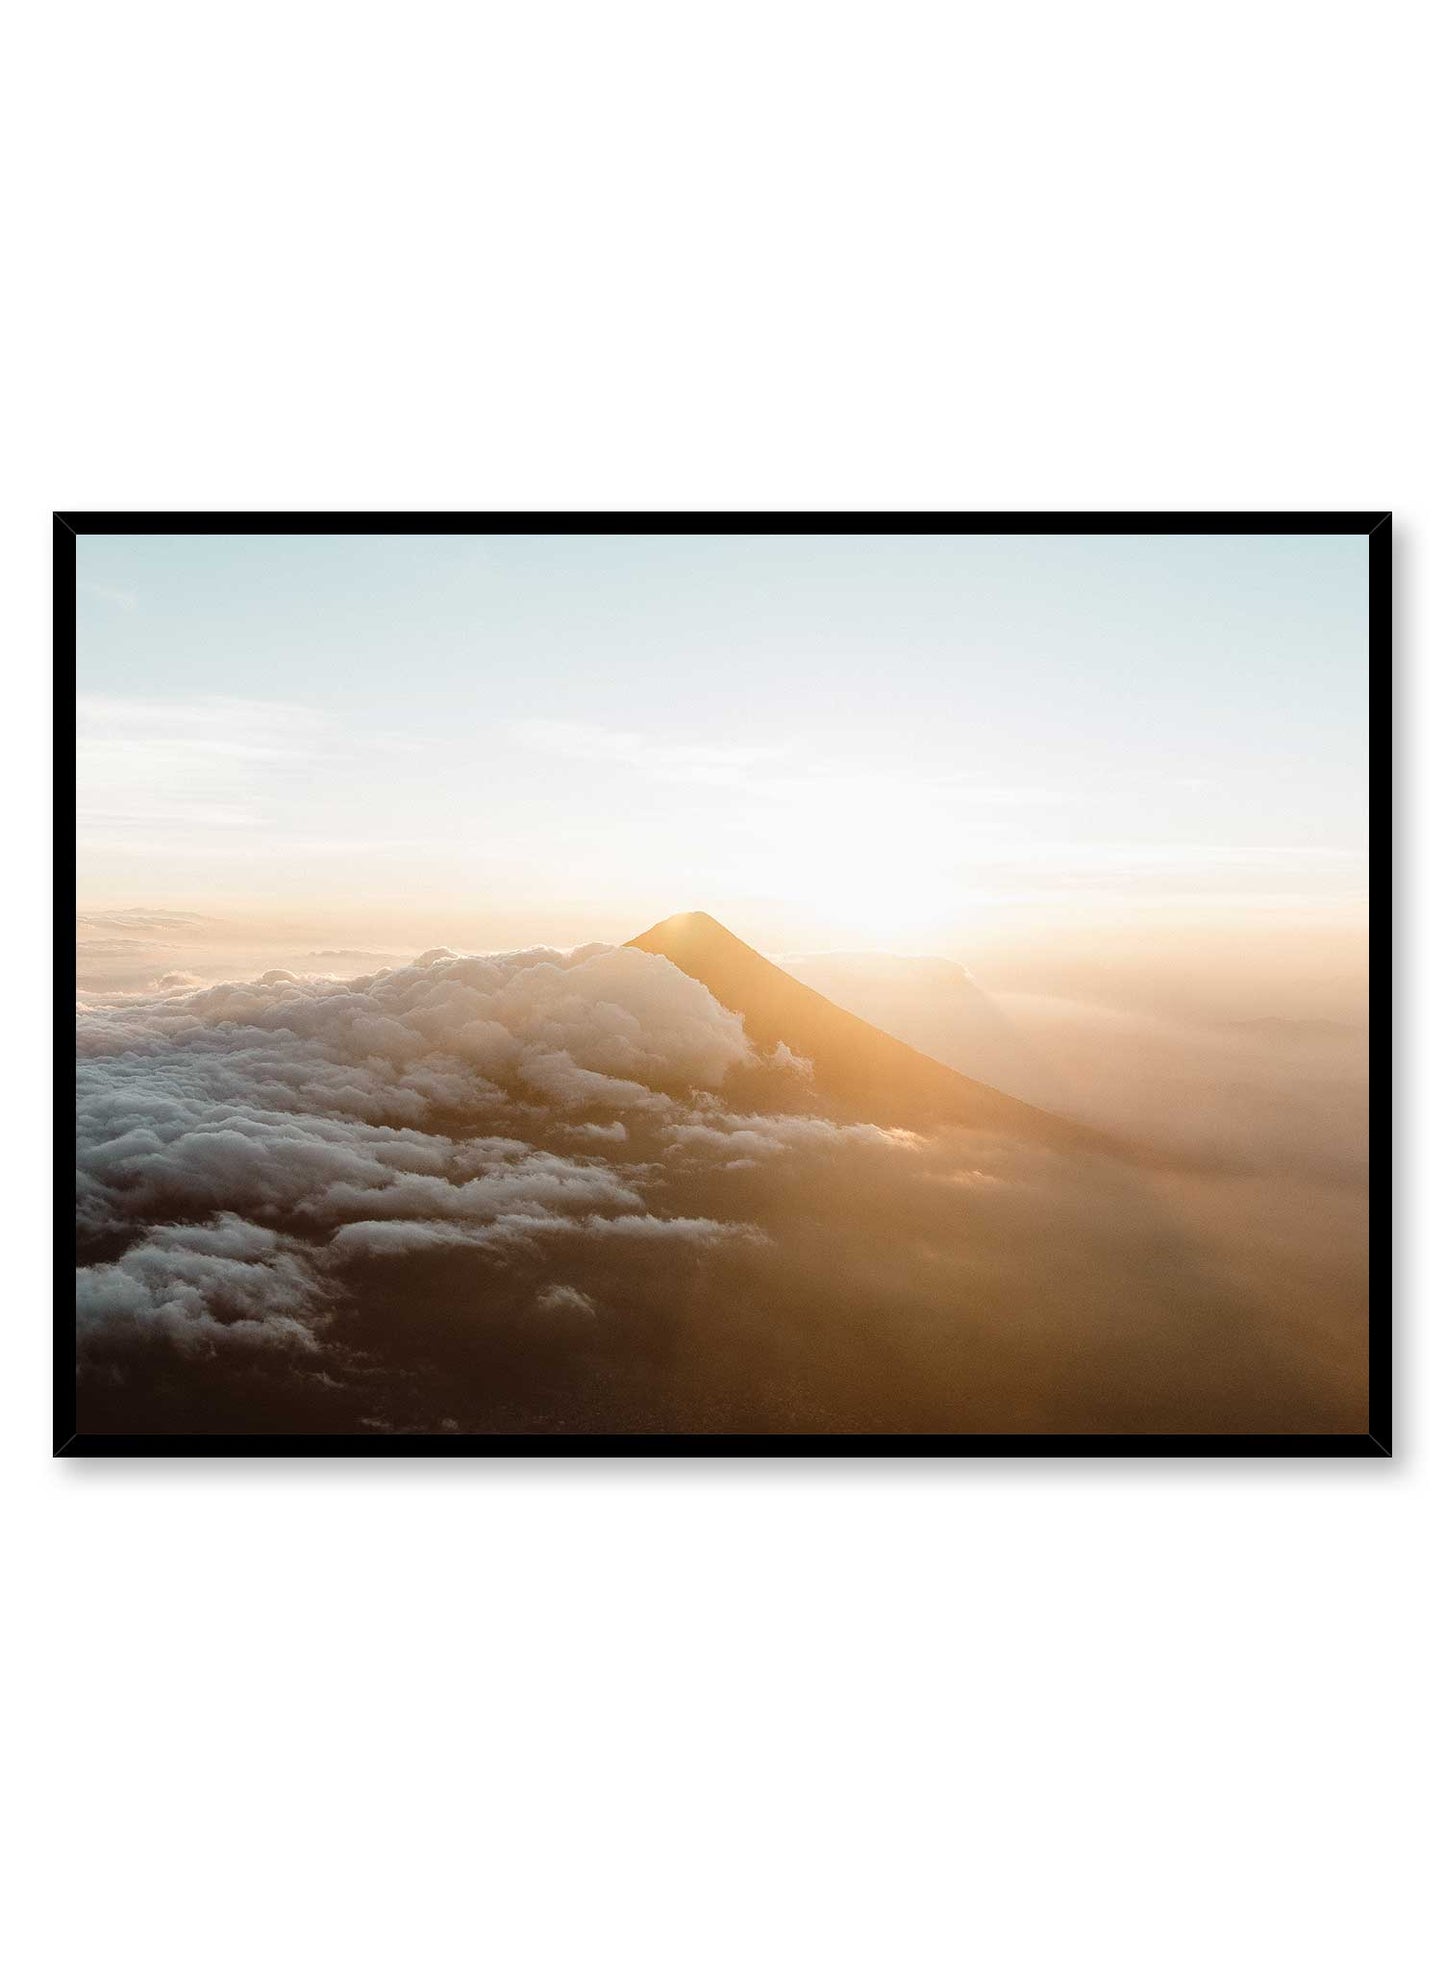 Zenith' is a breathtaking landscape photography poster by Opposite Wall of a sun-kissed mountain peaking through the clouds in the Guatemala sky.